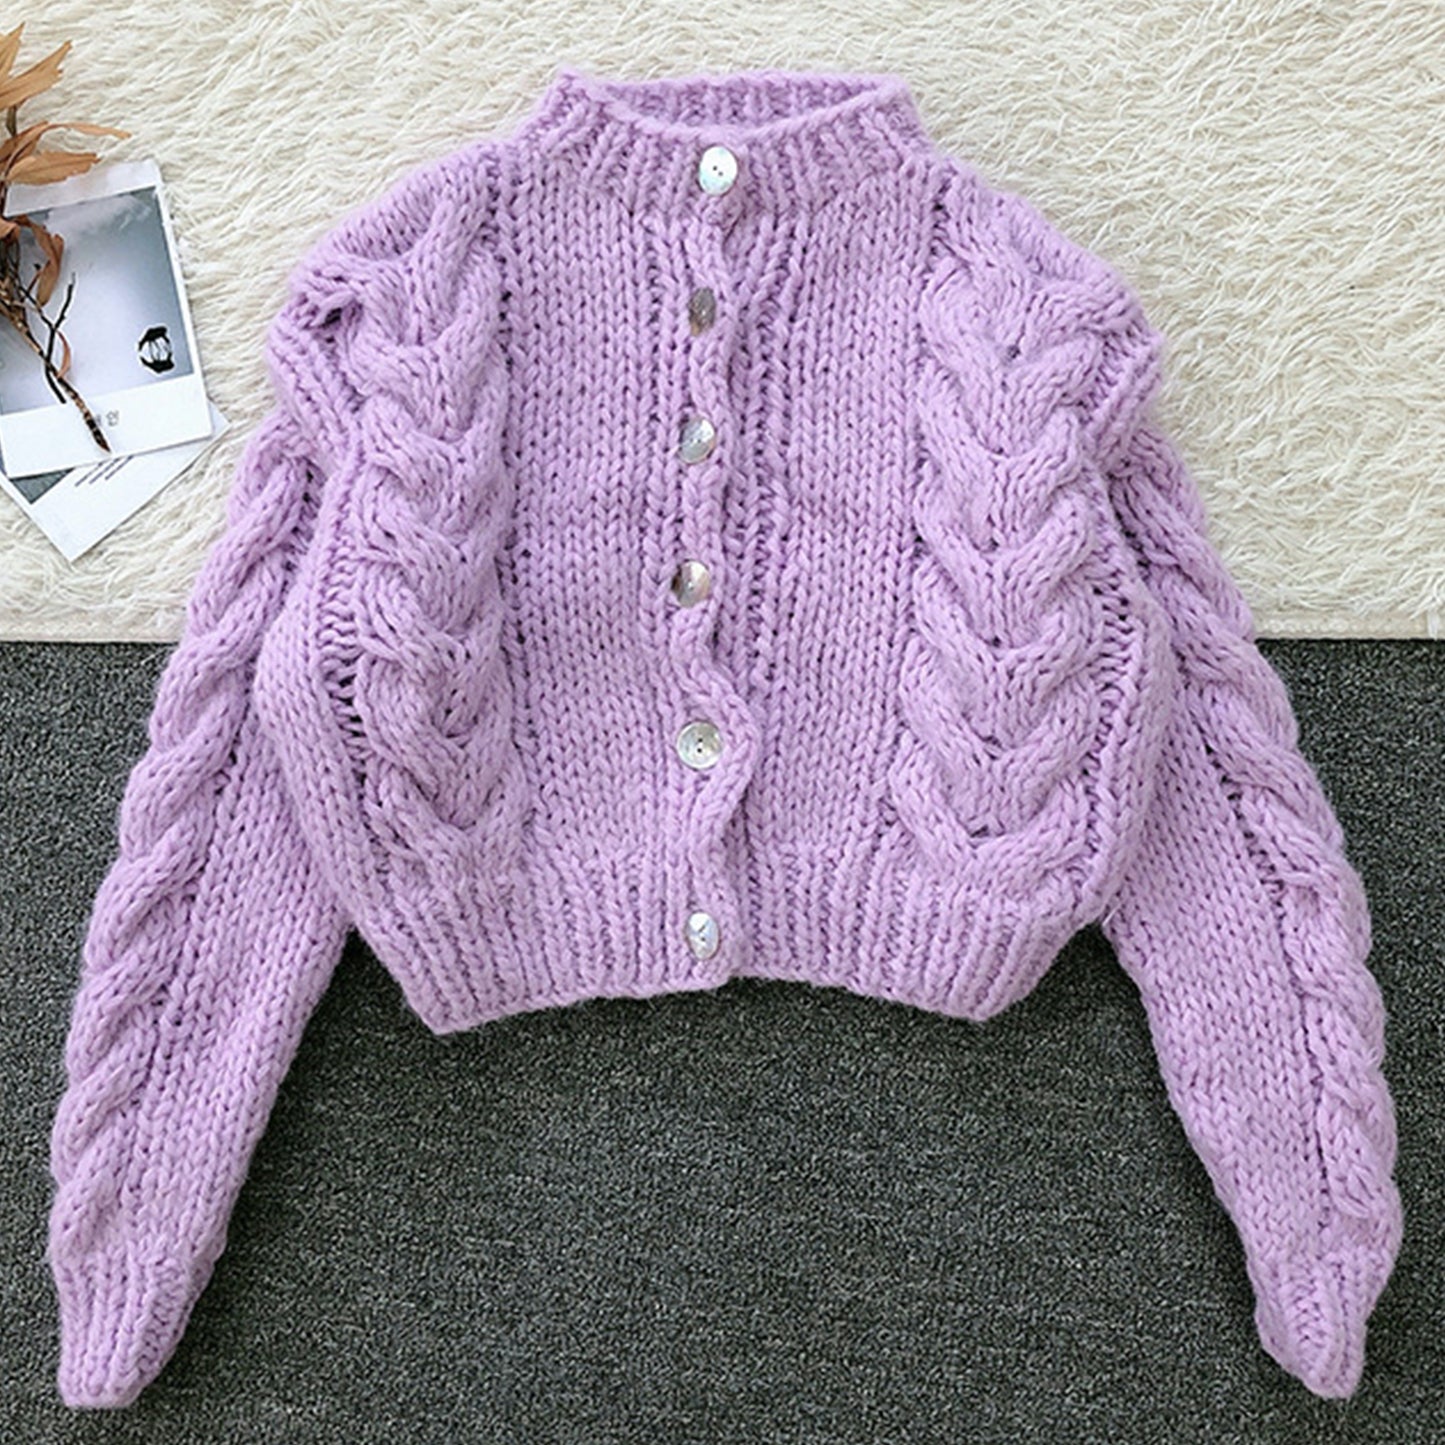 Knitted Sweater Women's Mohair Wool Loose Cardigan Jacket, Knit Top, Handmade Clothing, Gift For Women, Hand-knit Outfit